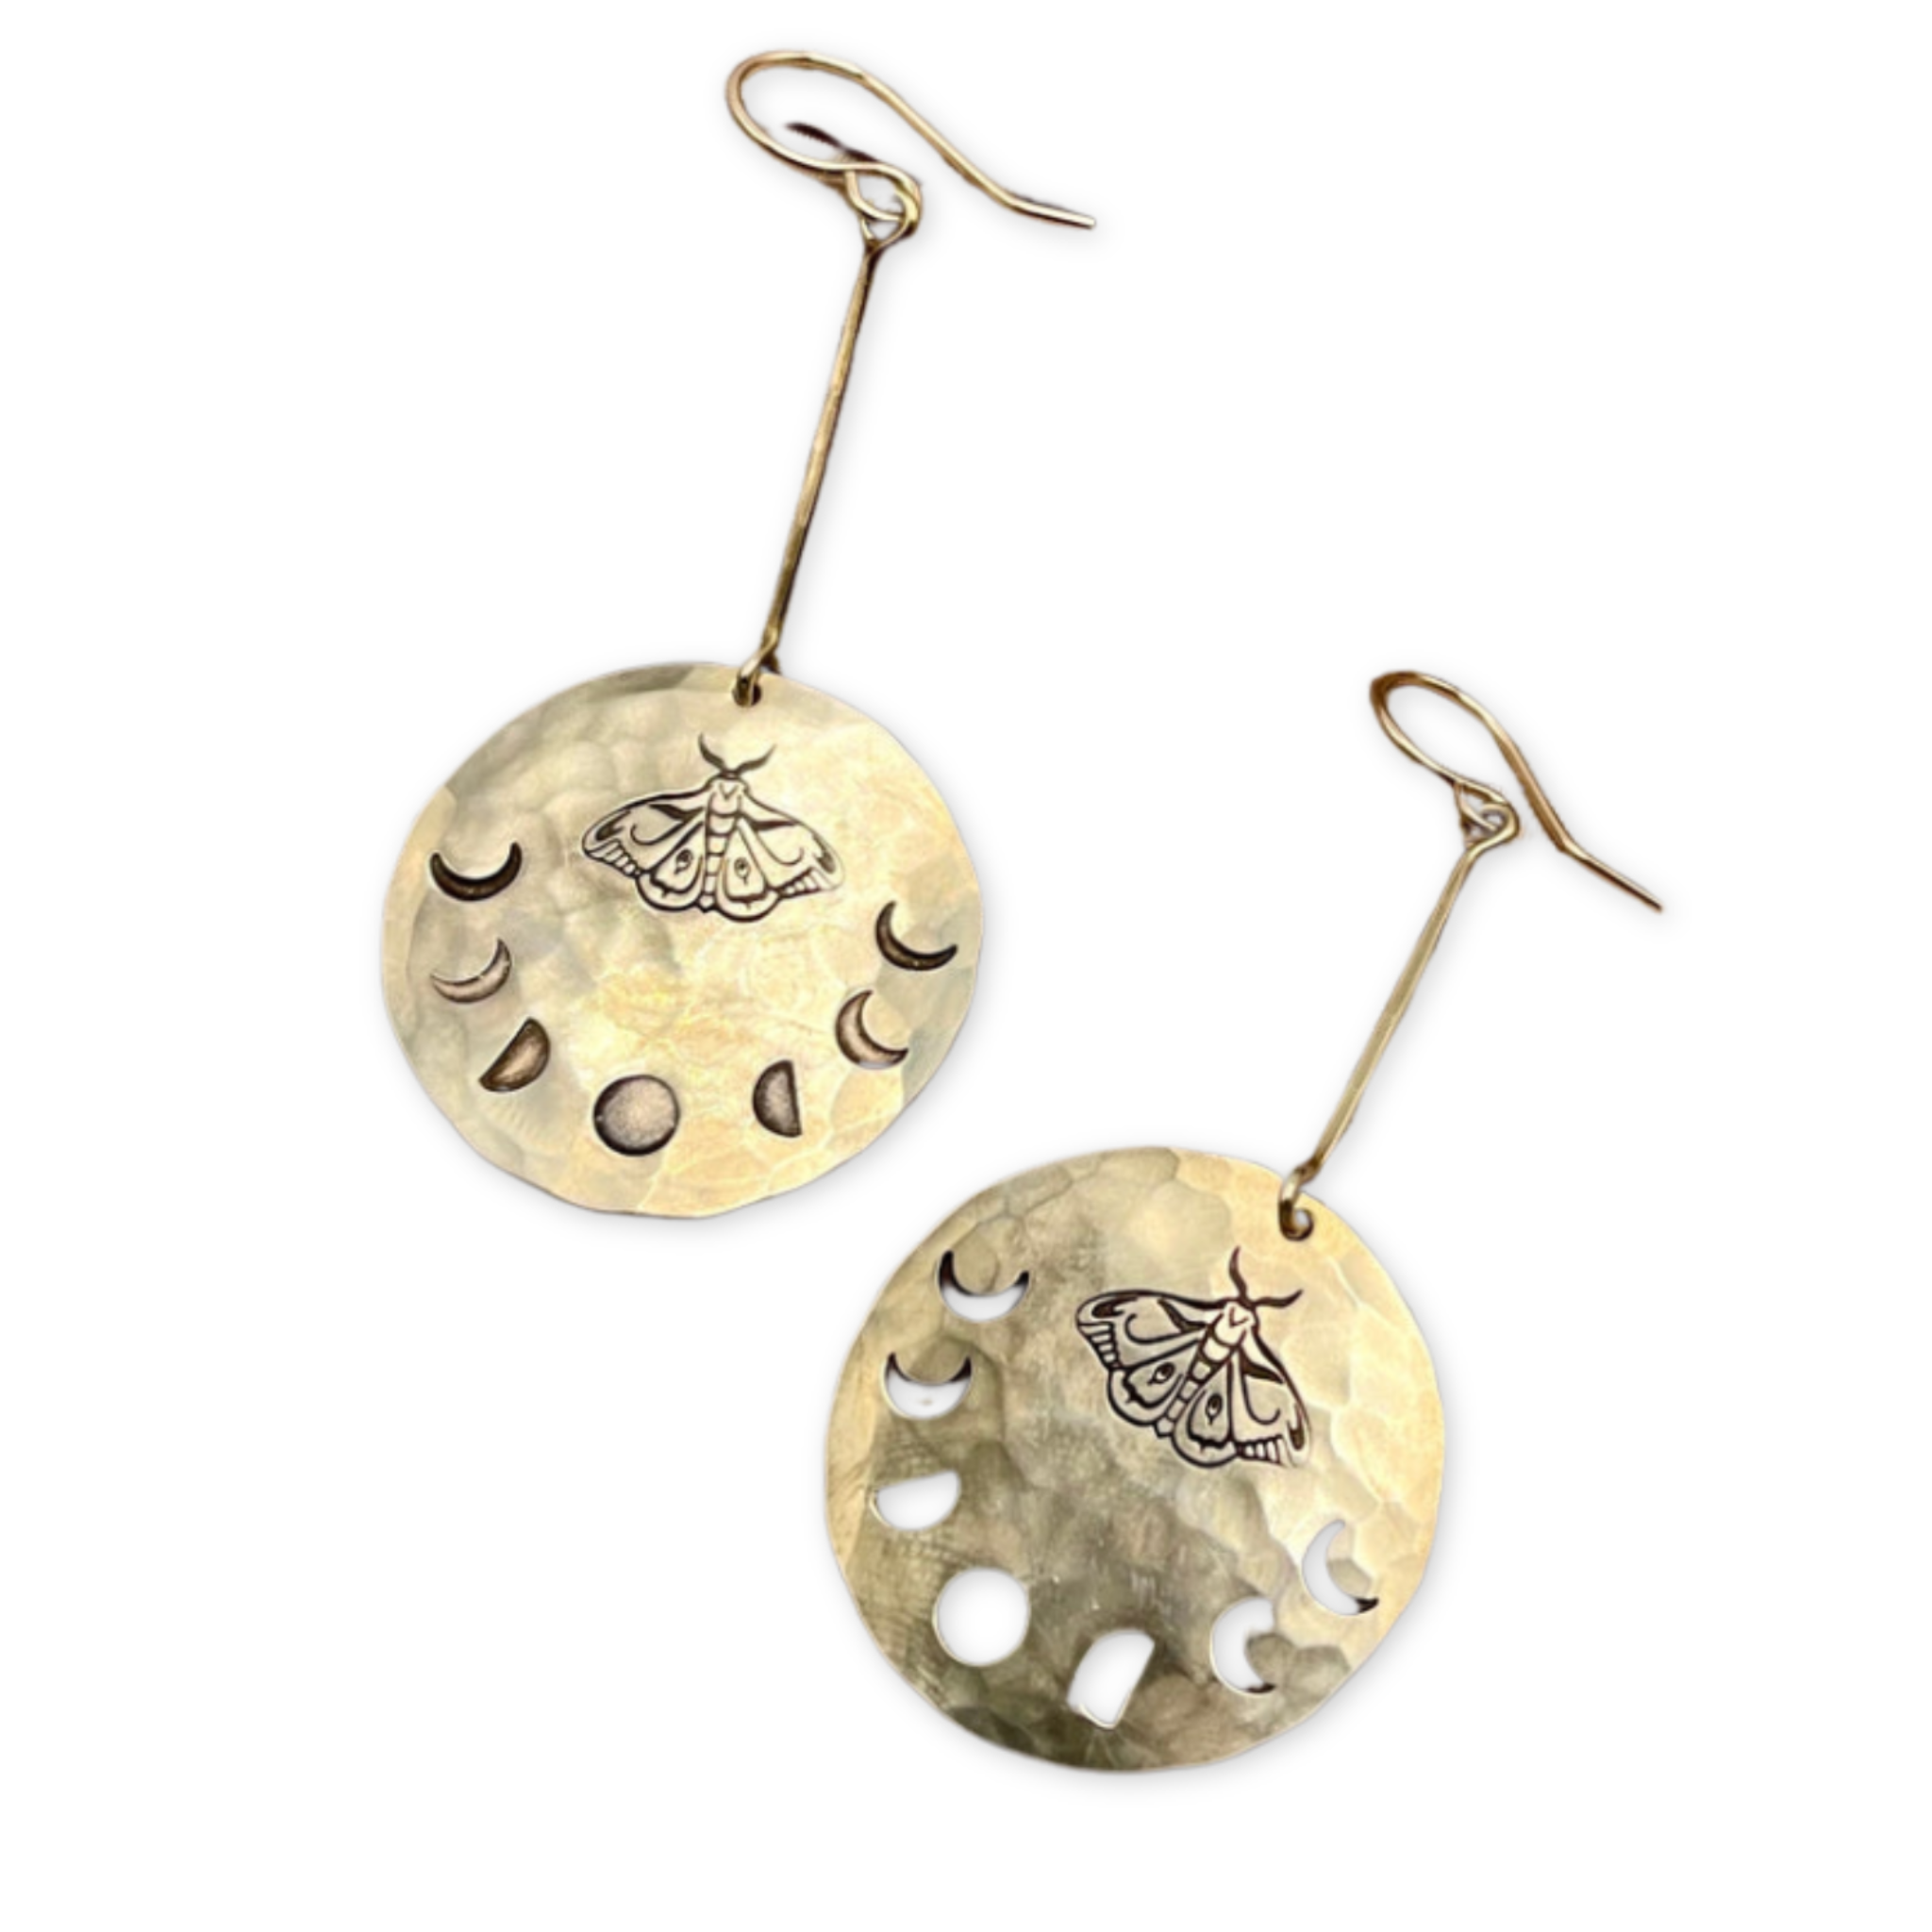 earrings with a a hammered disc with a month and moon phase